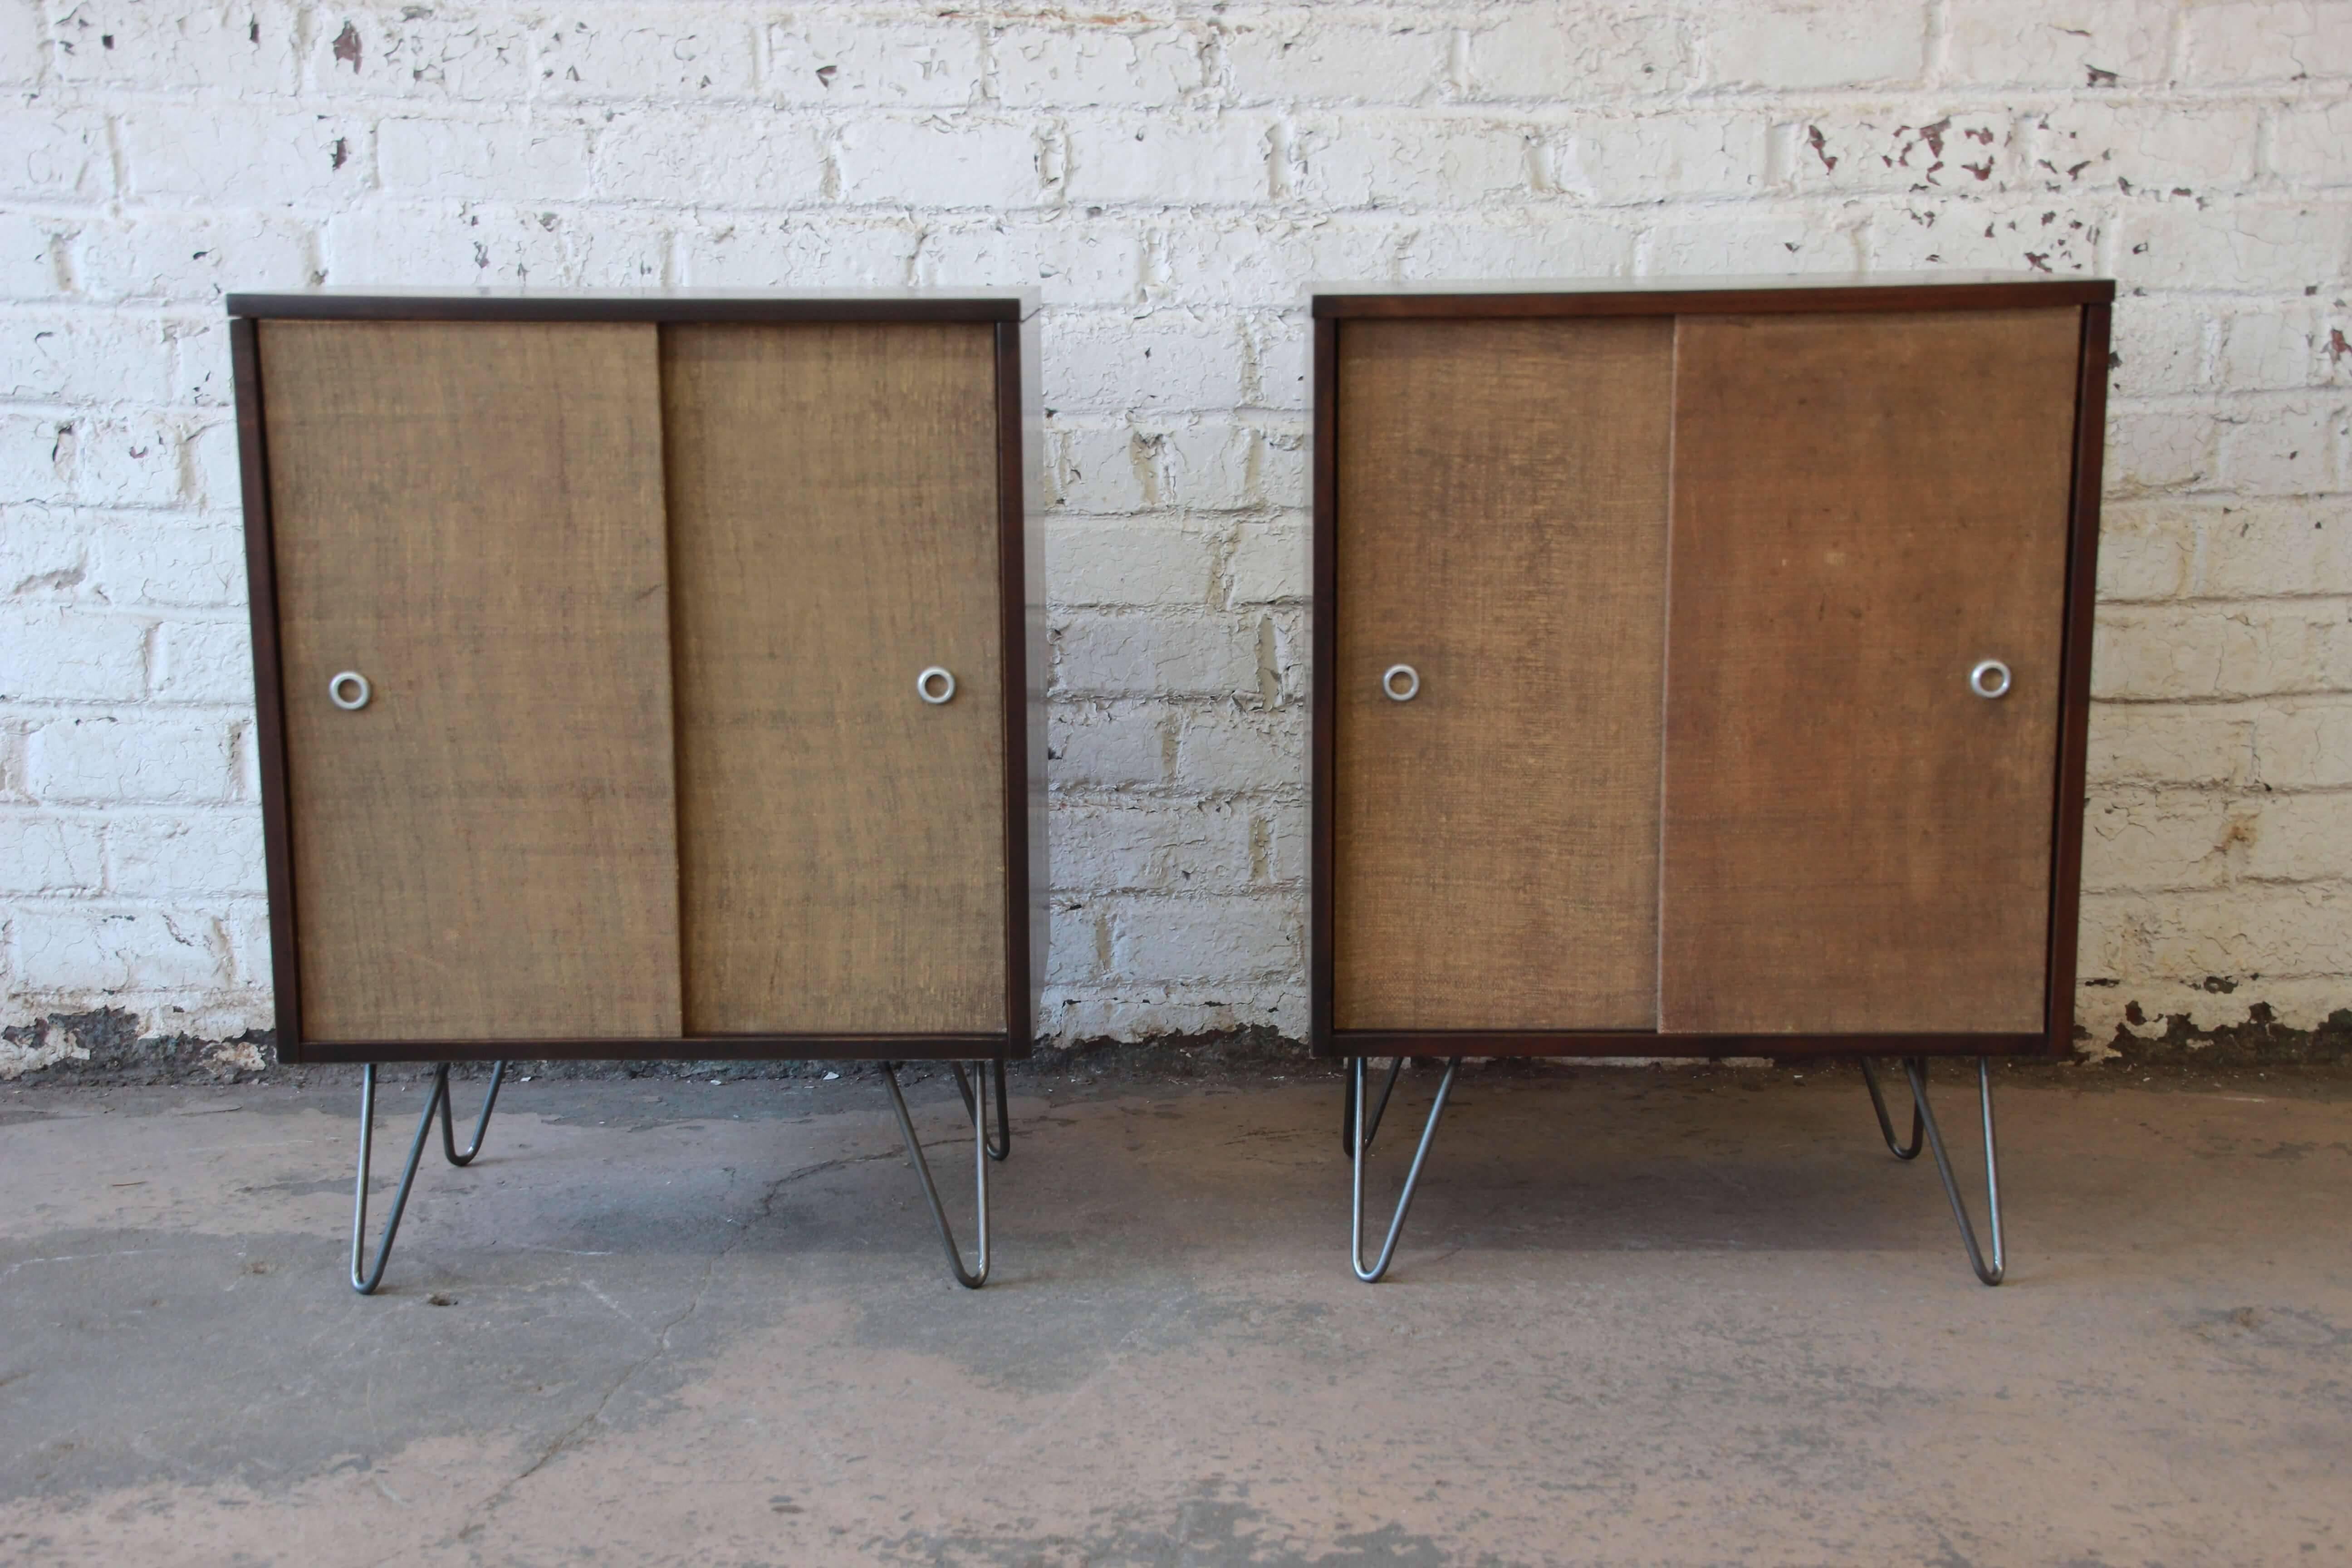 Offering a very nice pair of Paul McCobb for Planner Group cabinets on hairpin legs. The cabinet serve nicely as night stands or end tables. Each have the original canvas front sliding cabinet doors with aluminium pulls. They open up to a nice